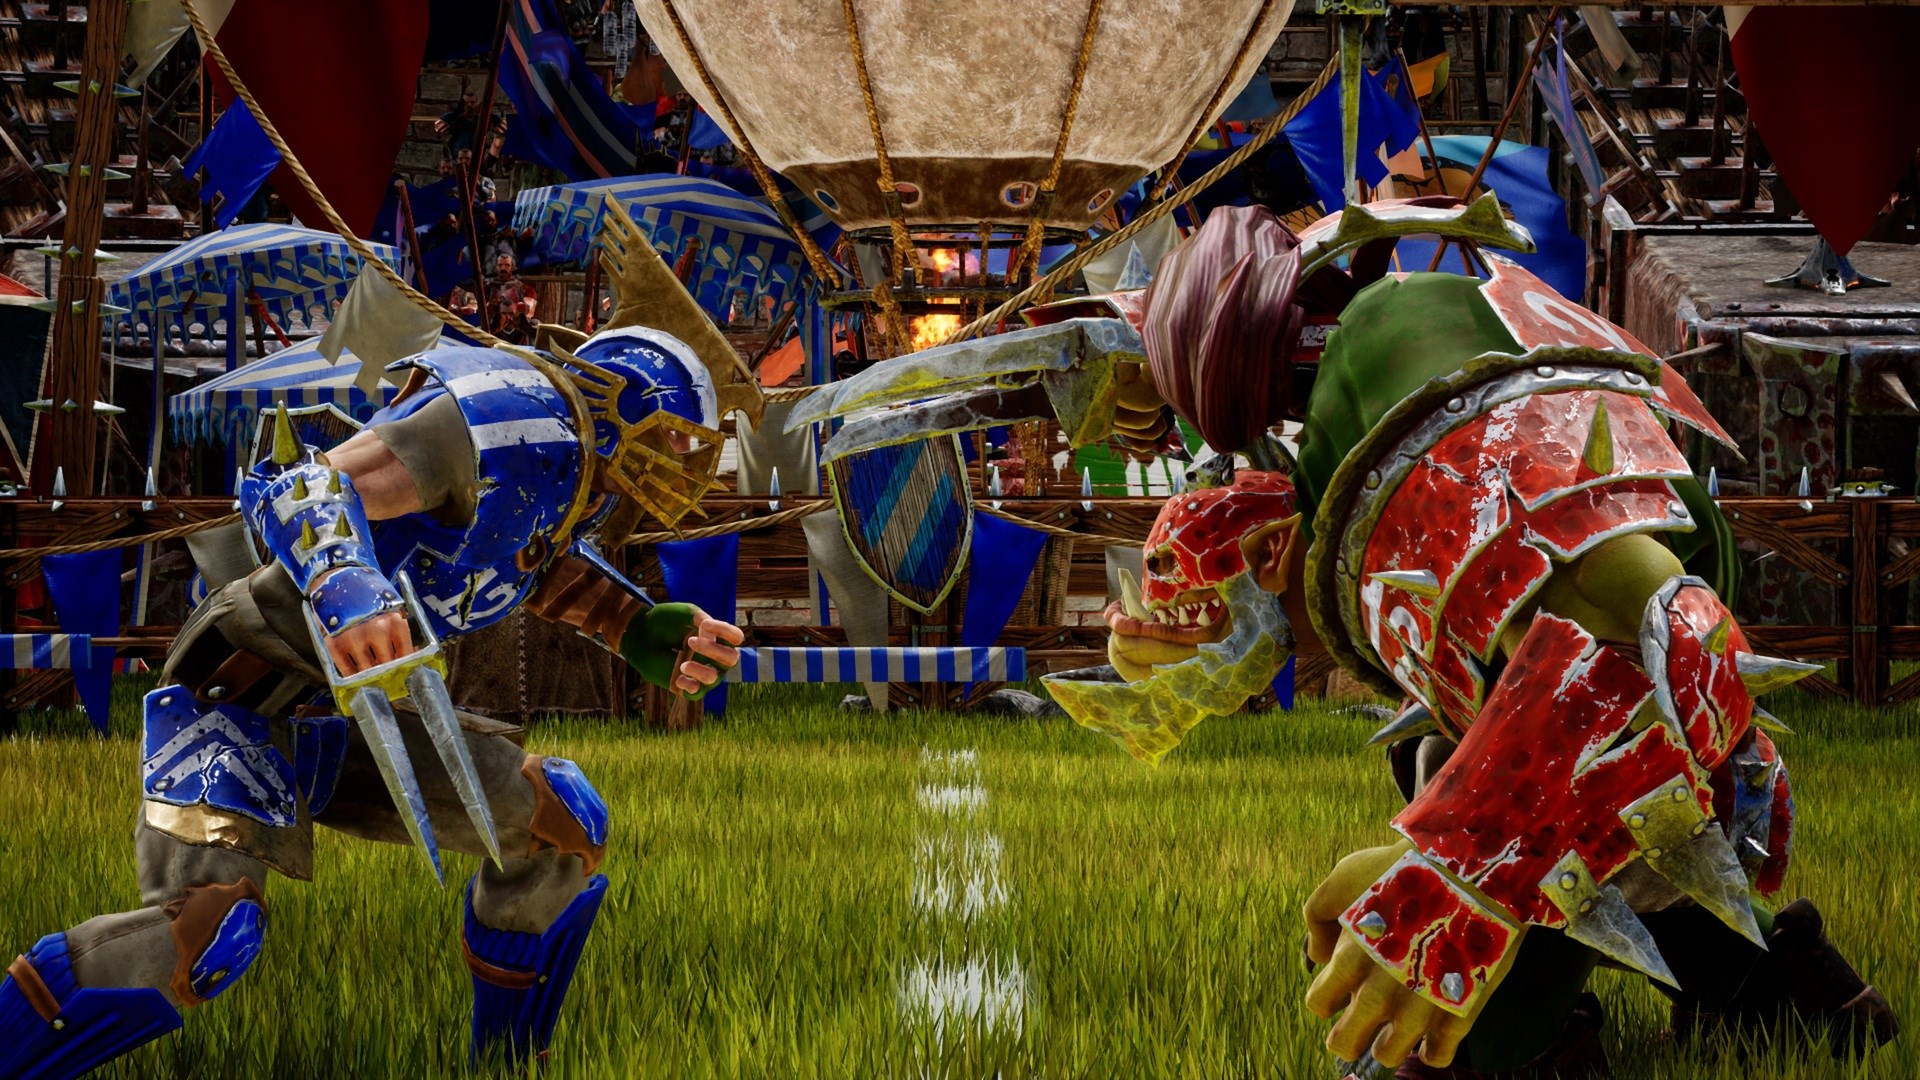 Blood Bowl 3 - Imperial Nobility Edition Steam CD Key